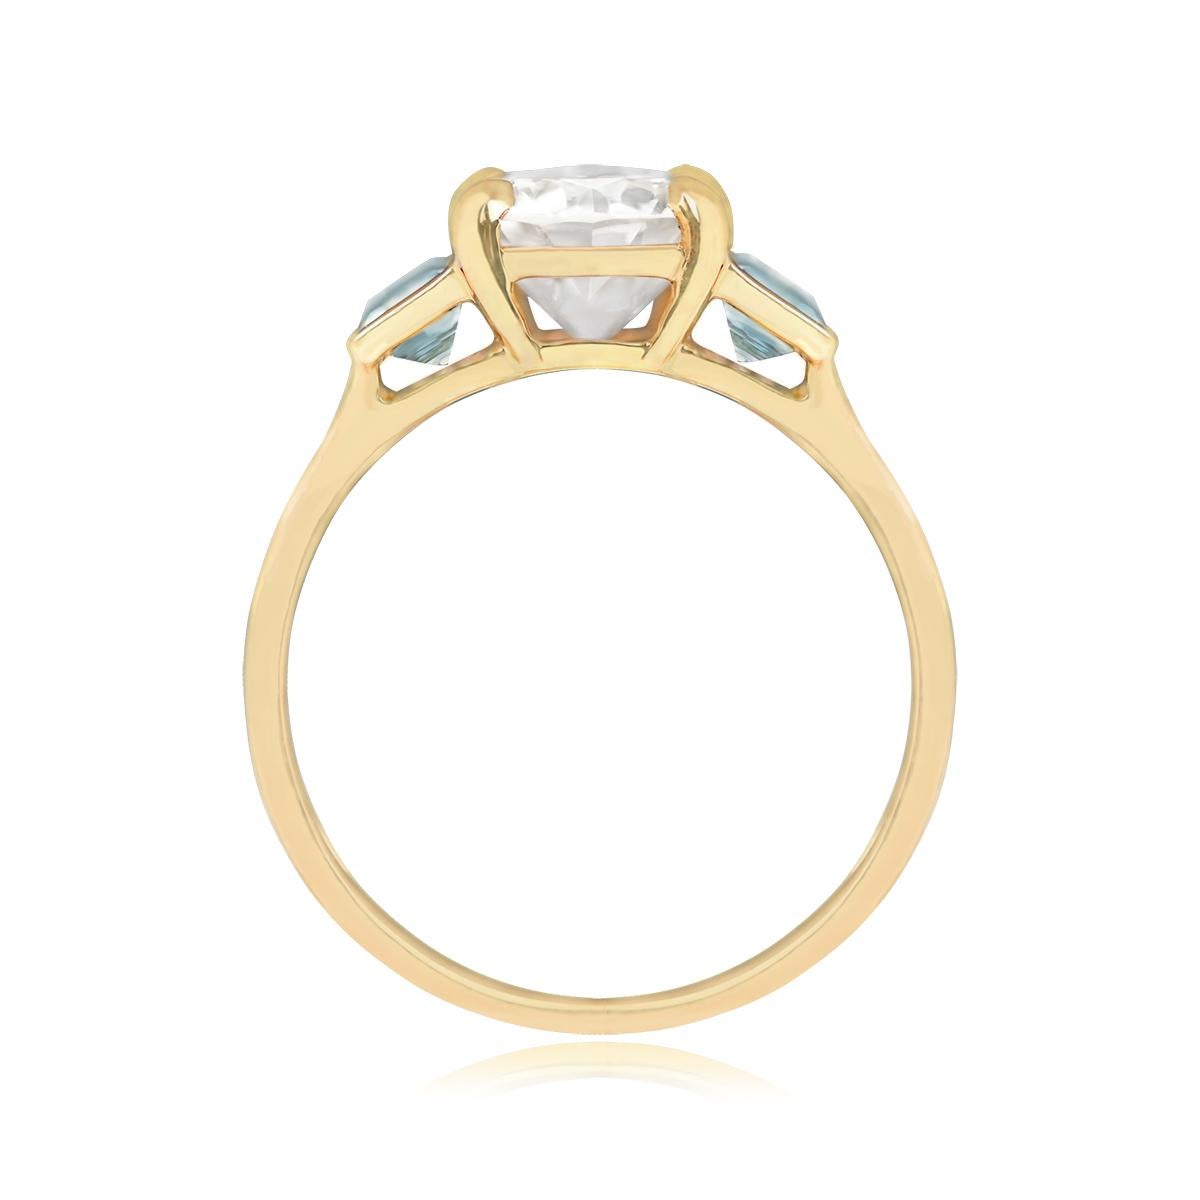 GIA 1.54ct Old European Cut Diamond Engagement Ring, 18k Yellow Gold In Excellent Condition For Sale In New York, NY